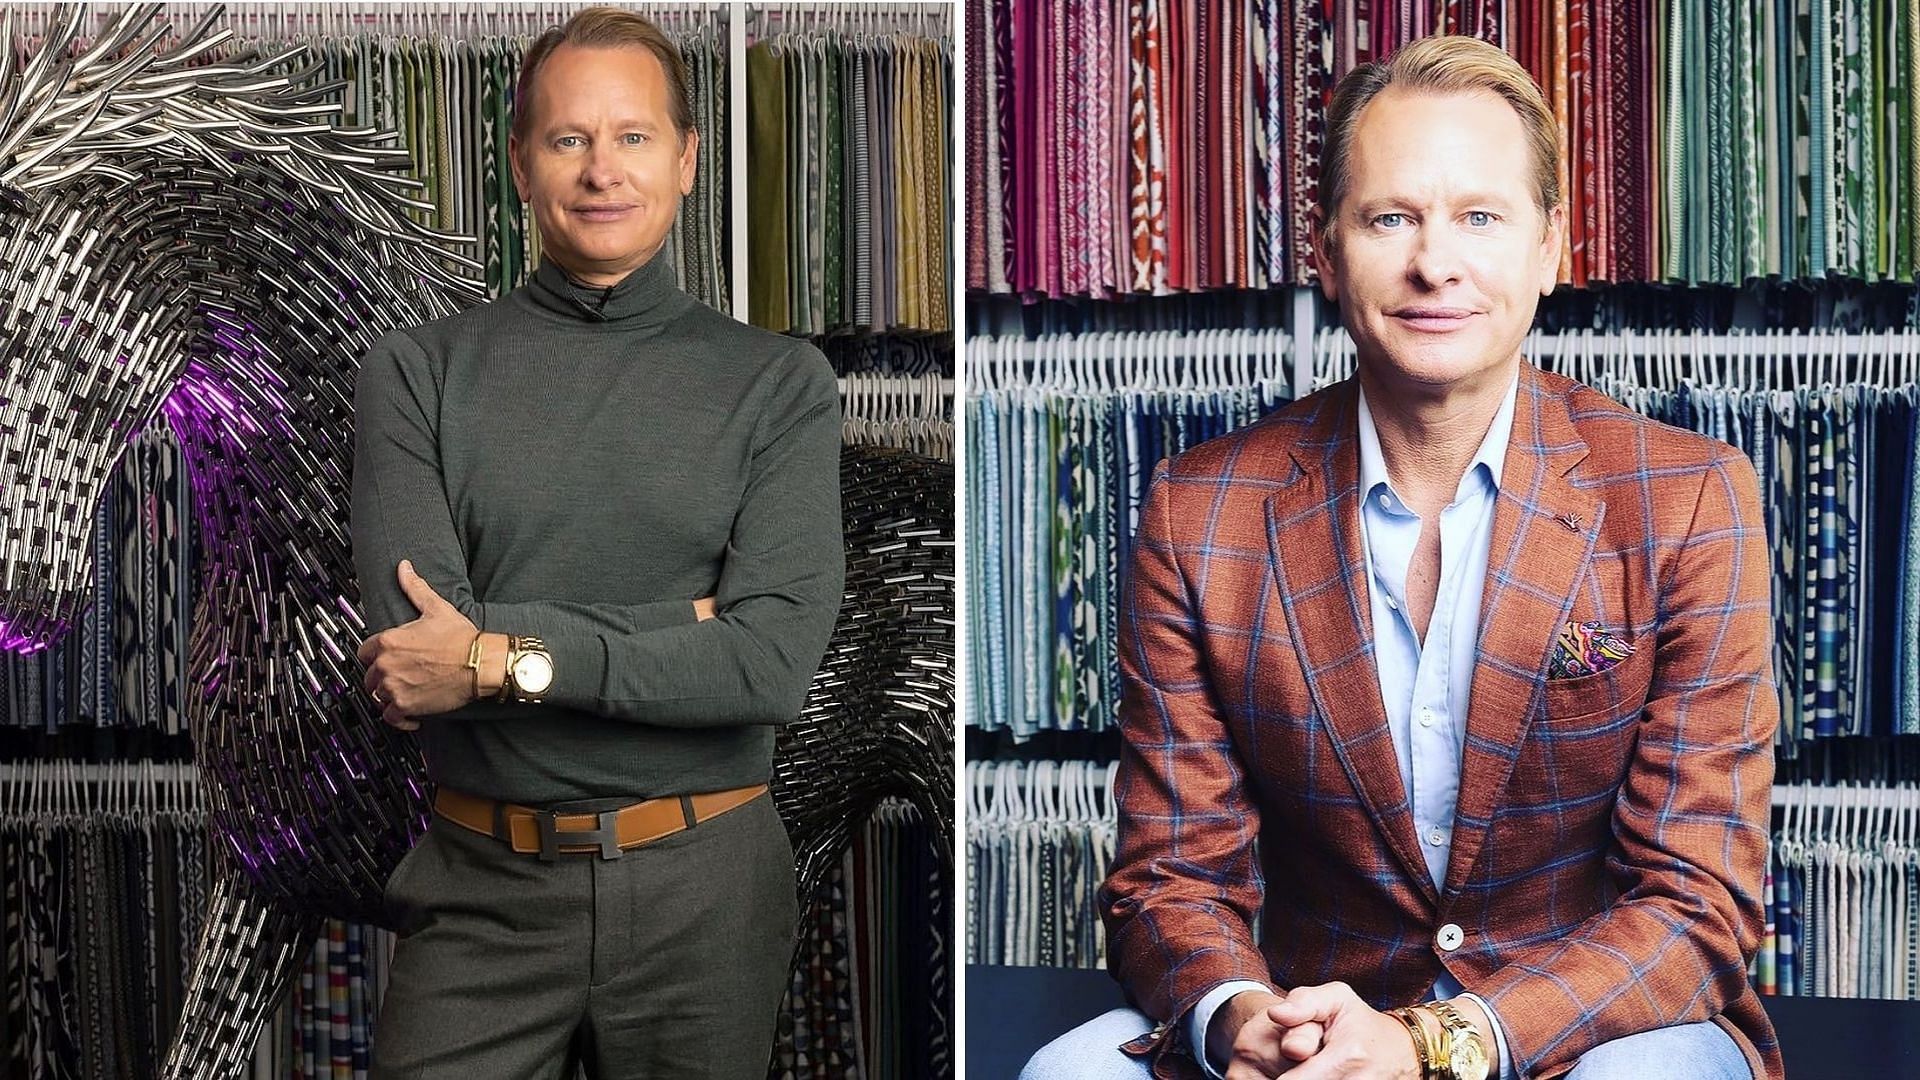 Carson Kressley opens up about his experience after his exit from Celebrity Big Brother (Image via carsonkressley/Instagram)